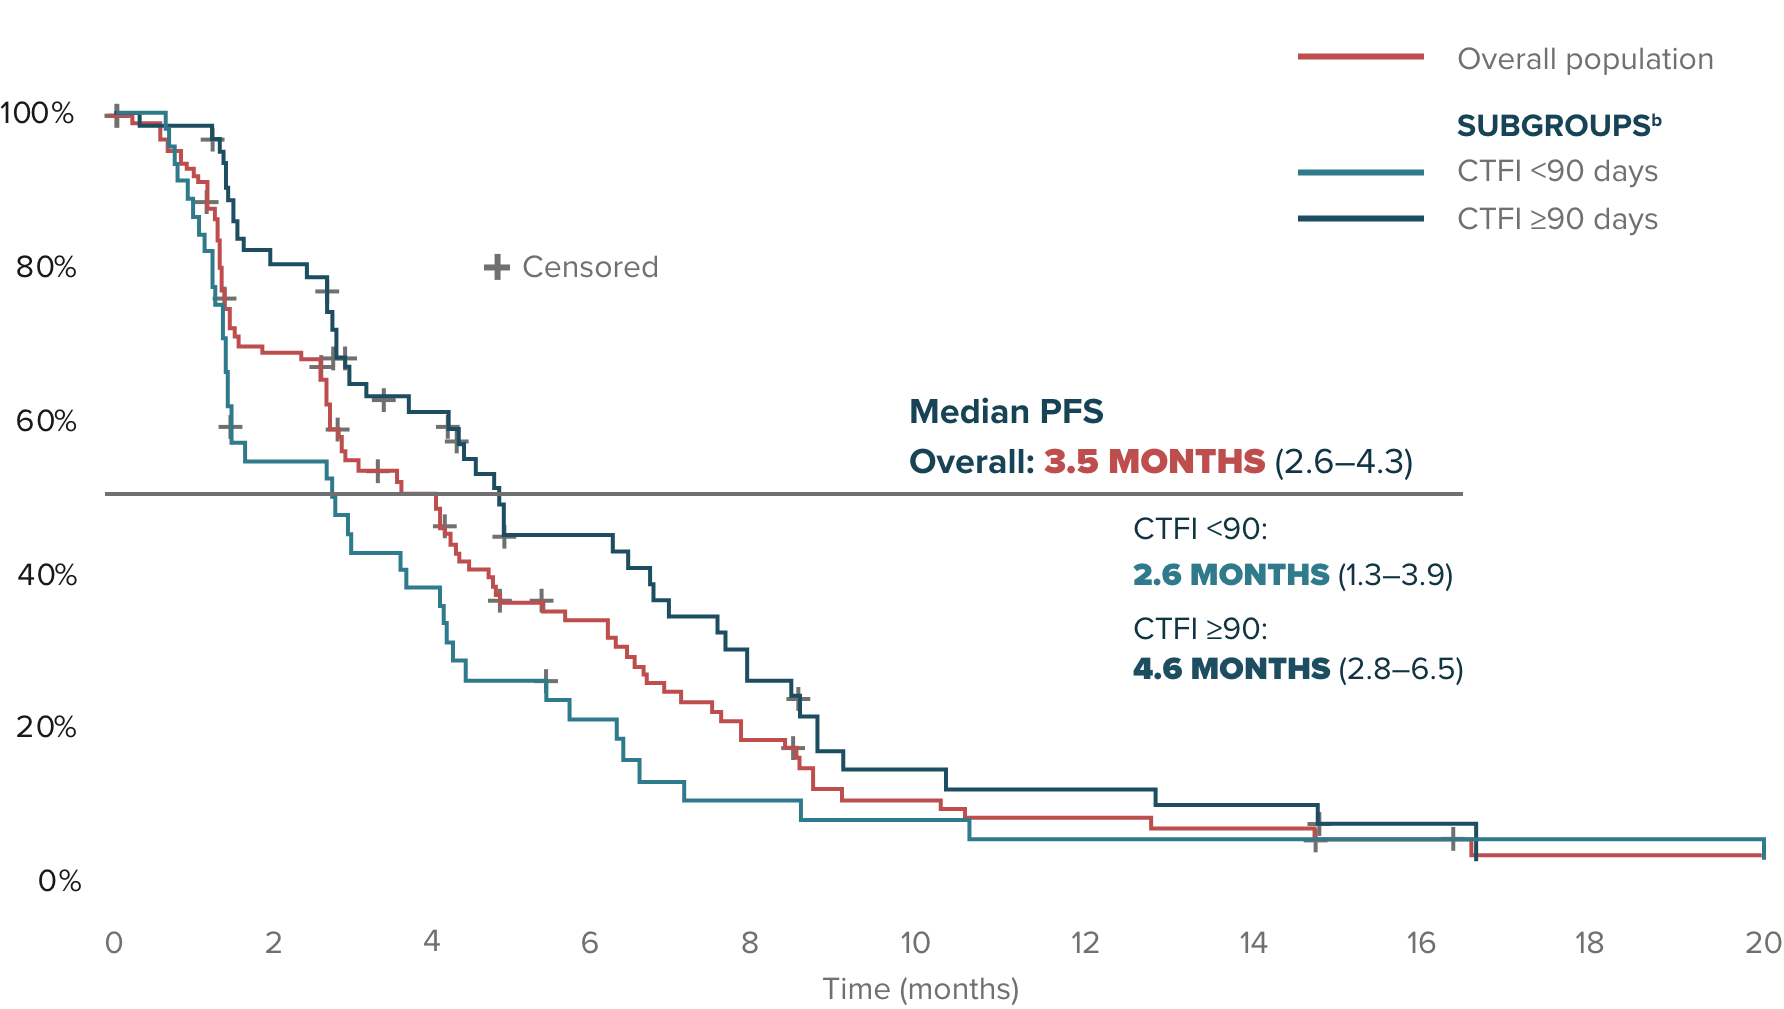 Investigator assessment of median progression-free survival in the overall population: 3.5 months (2.6-4.3).